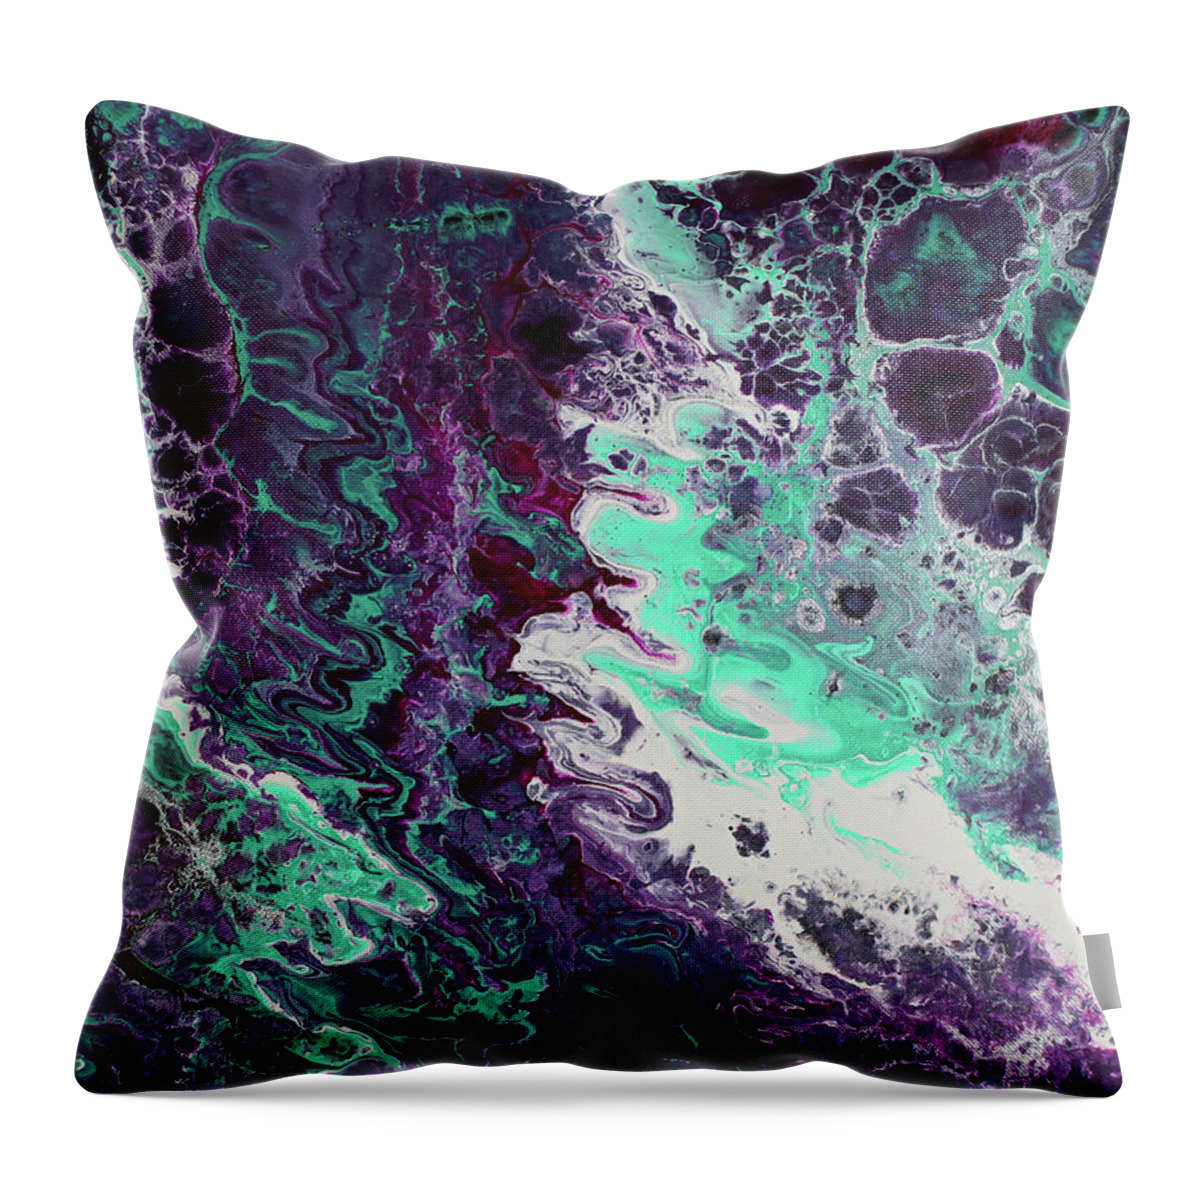  Throw Pillow featuring the painting Don't Know How To Be by Embrace The Matrix